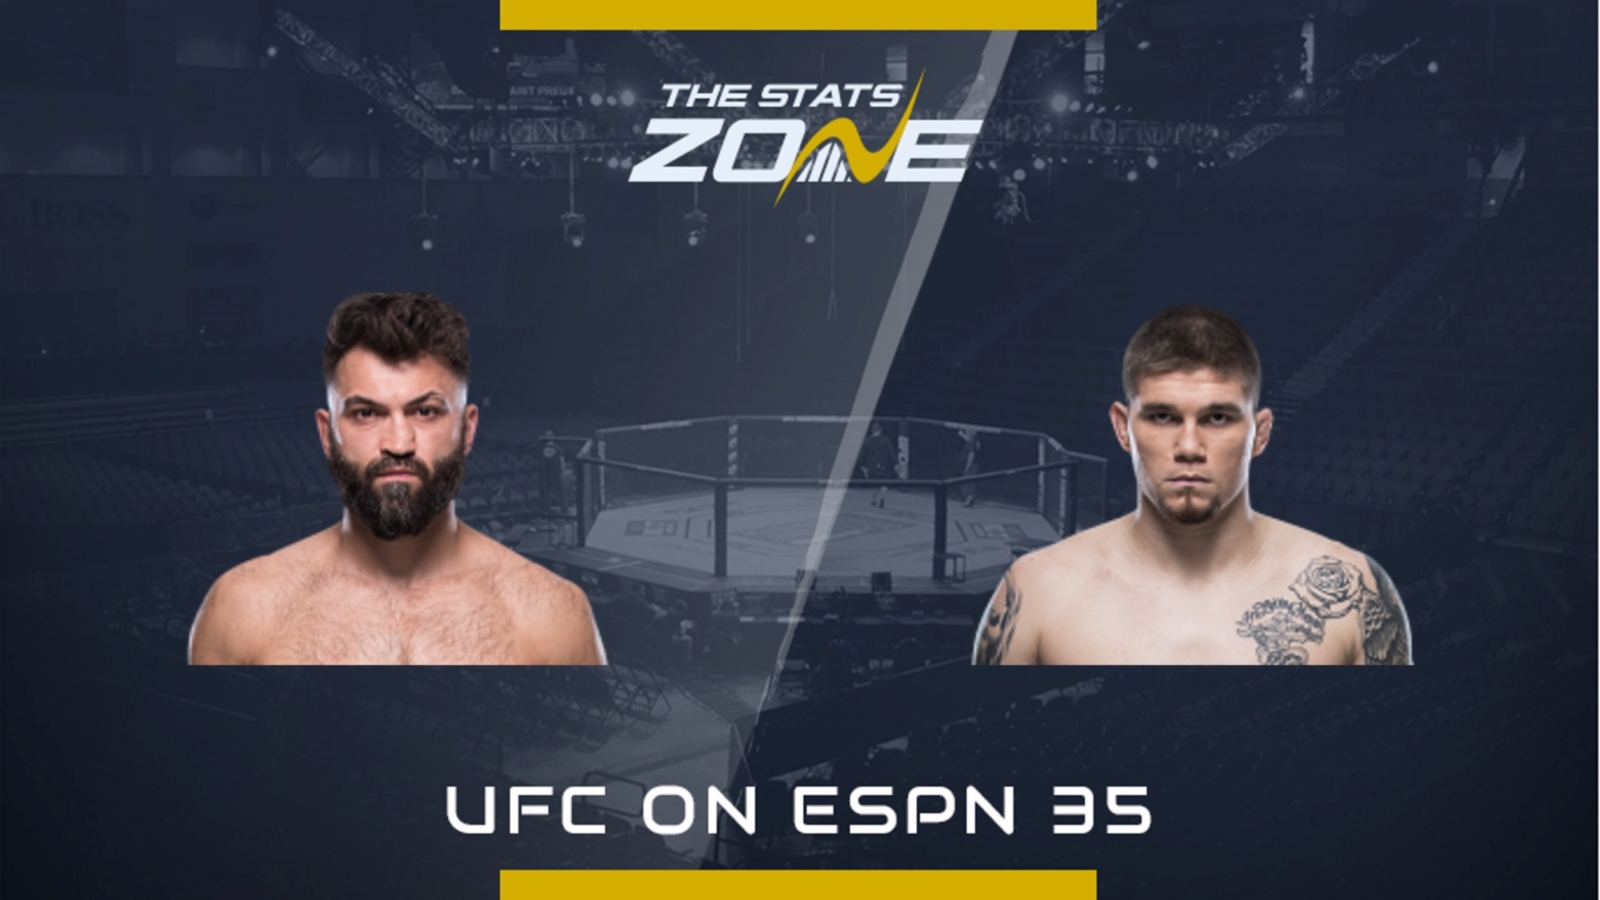 Mma Preview Andrei Arlovski Vs Jake Collier At Ufc On Espn 35 The Stats Zone 